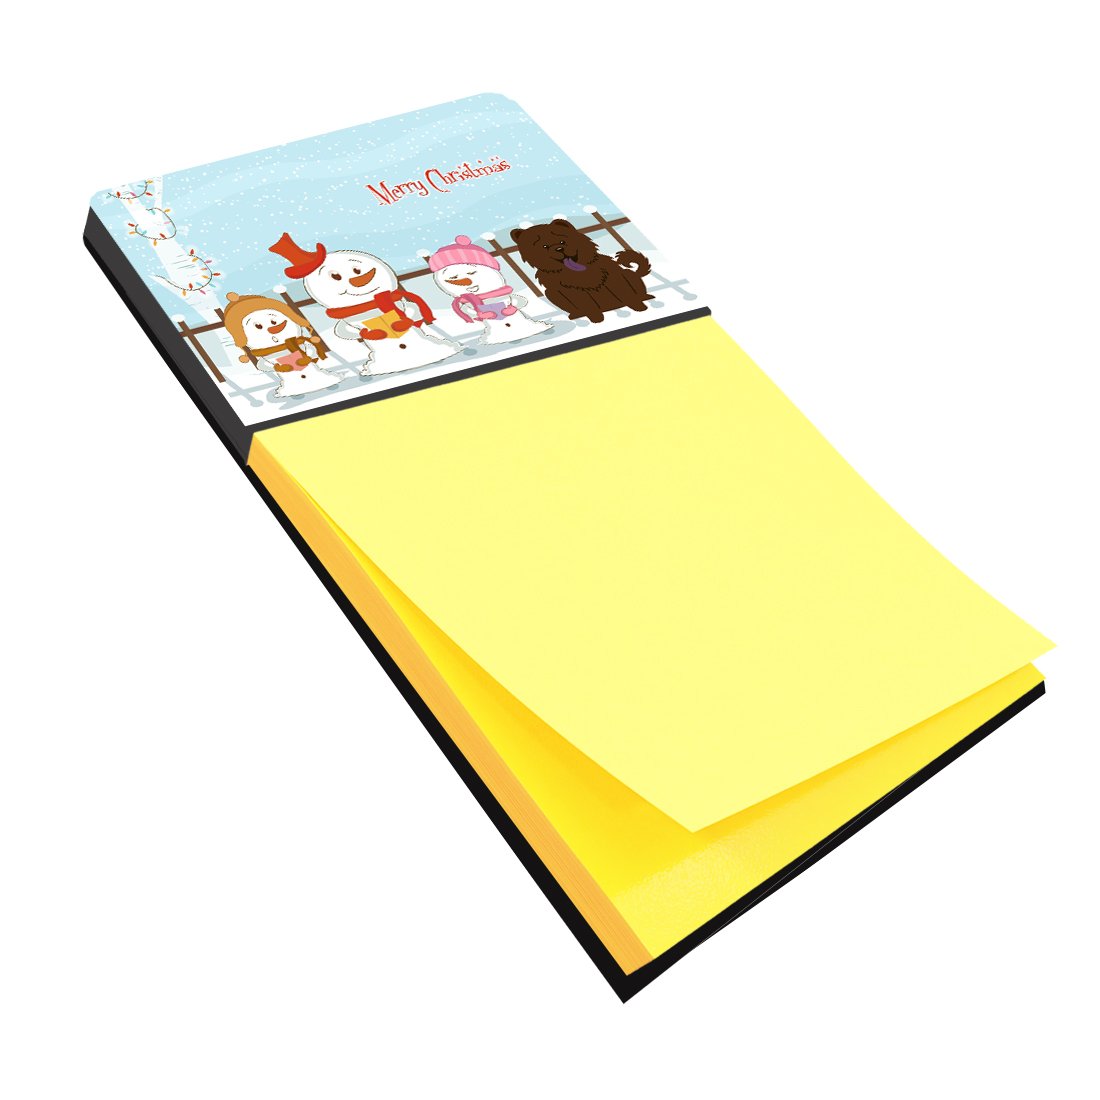 Merry Christmas Carolers Chow Chow Chocolate Sticky Note Holder BB2472SN by Caroline's Treasures